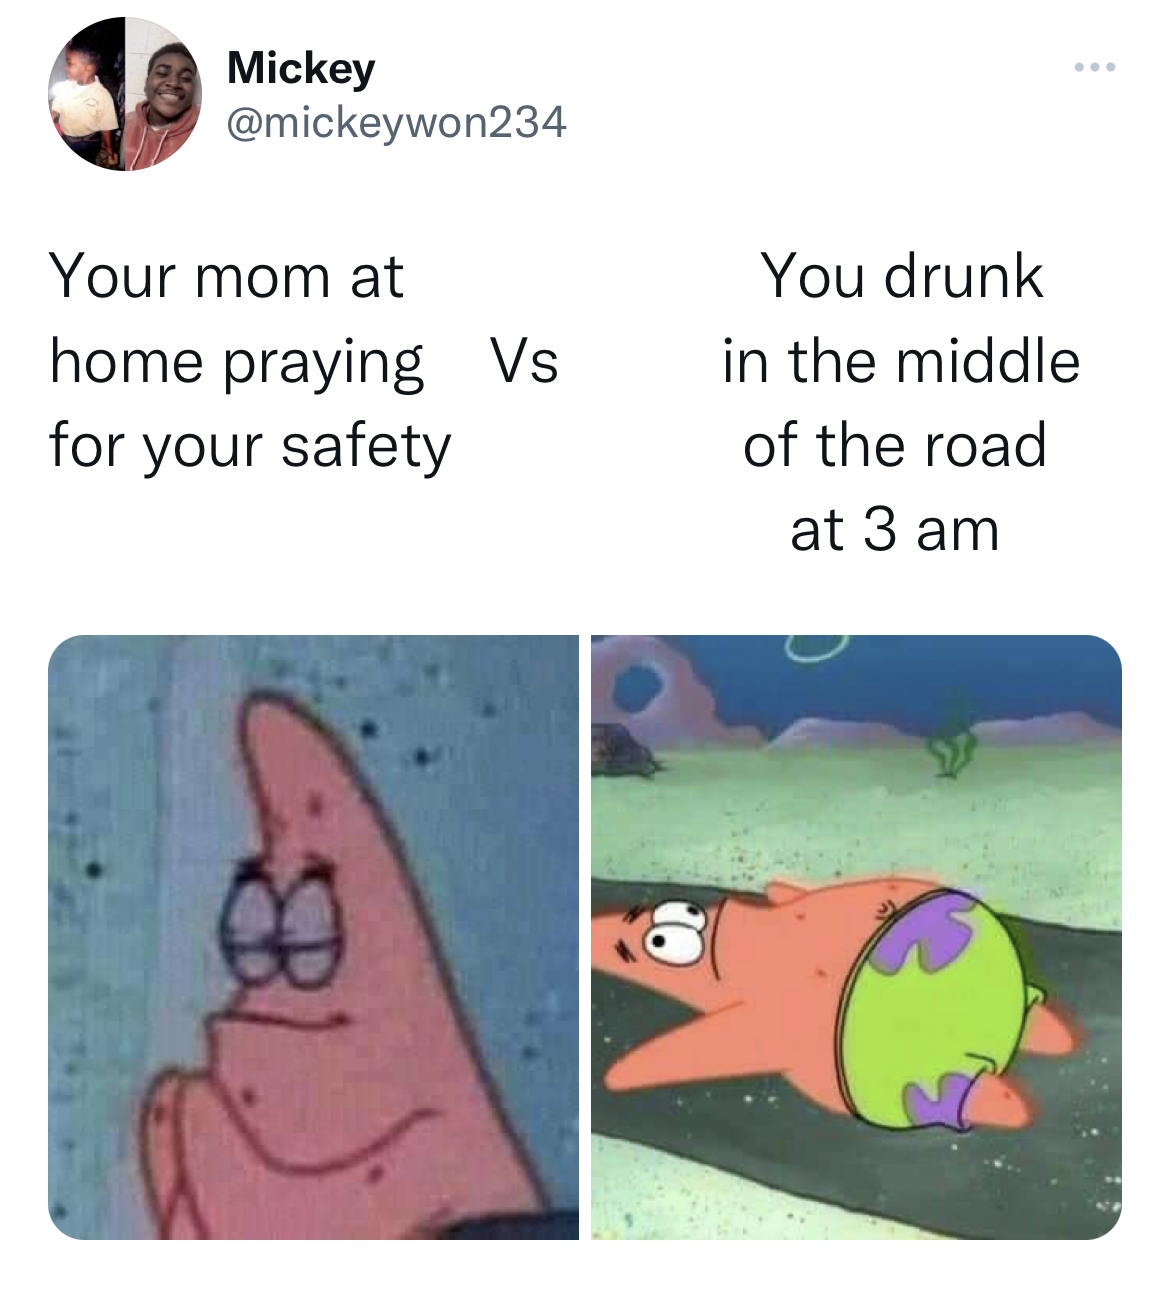 savage tweets to start the week - cartoon - Mickey Your mom at home praying Vs for your safety 81 You drunk in the middle of the road at 3 am